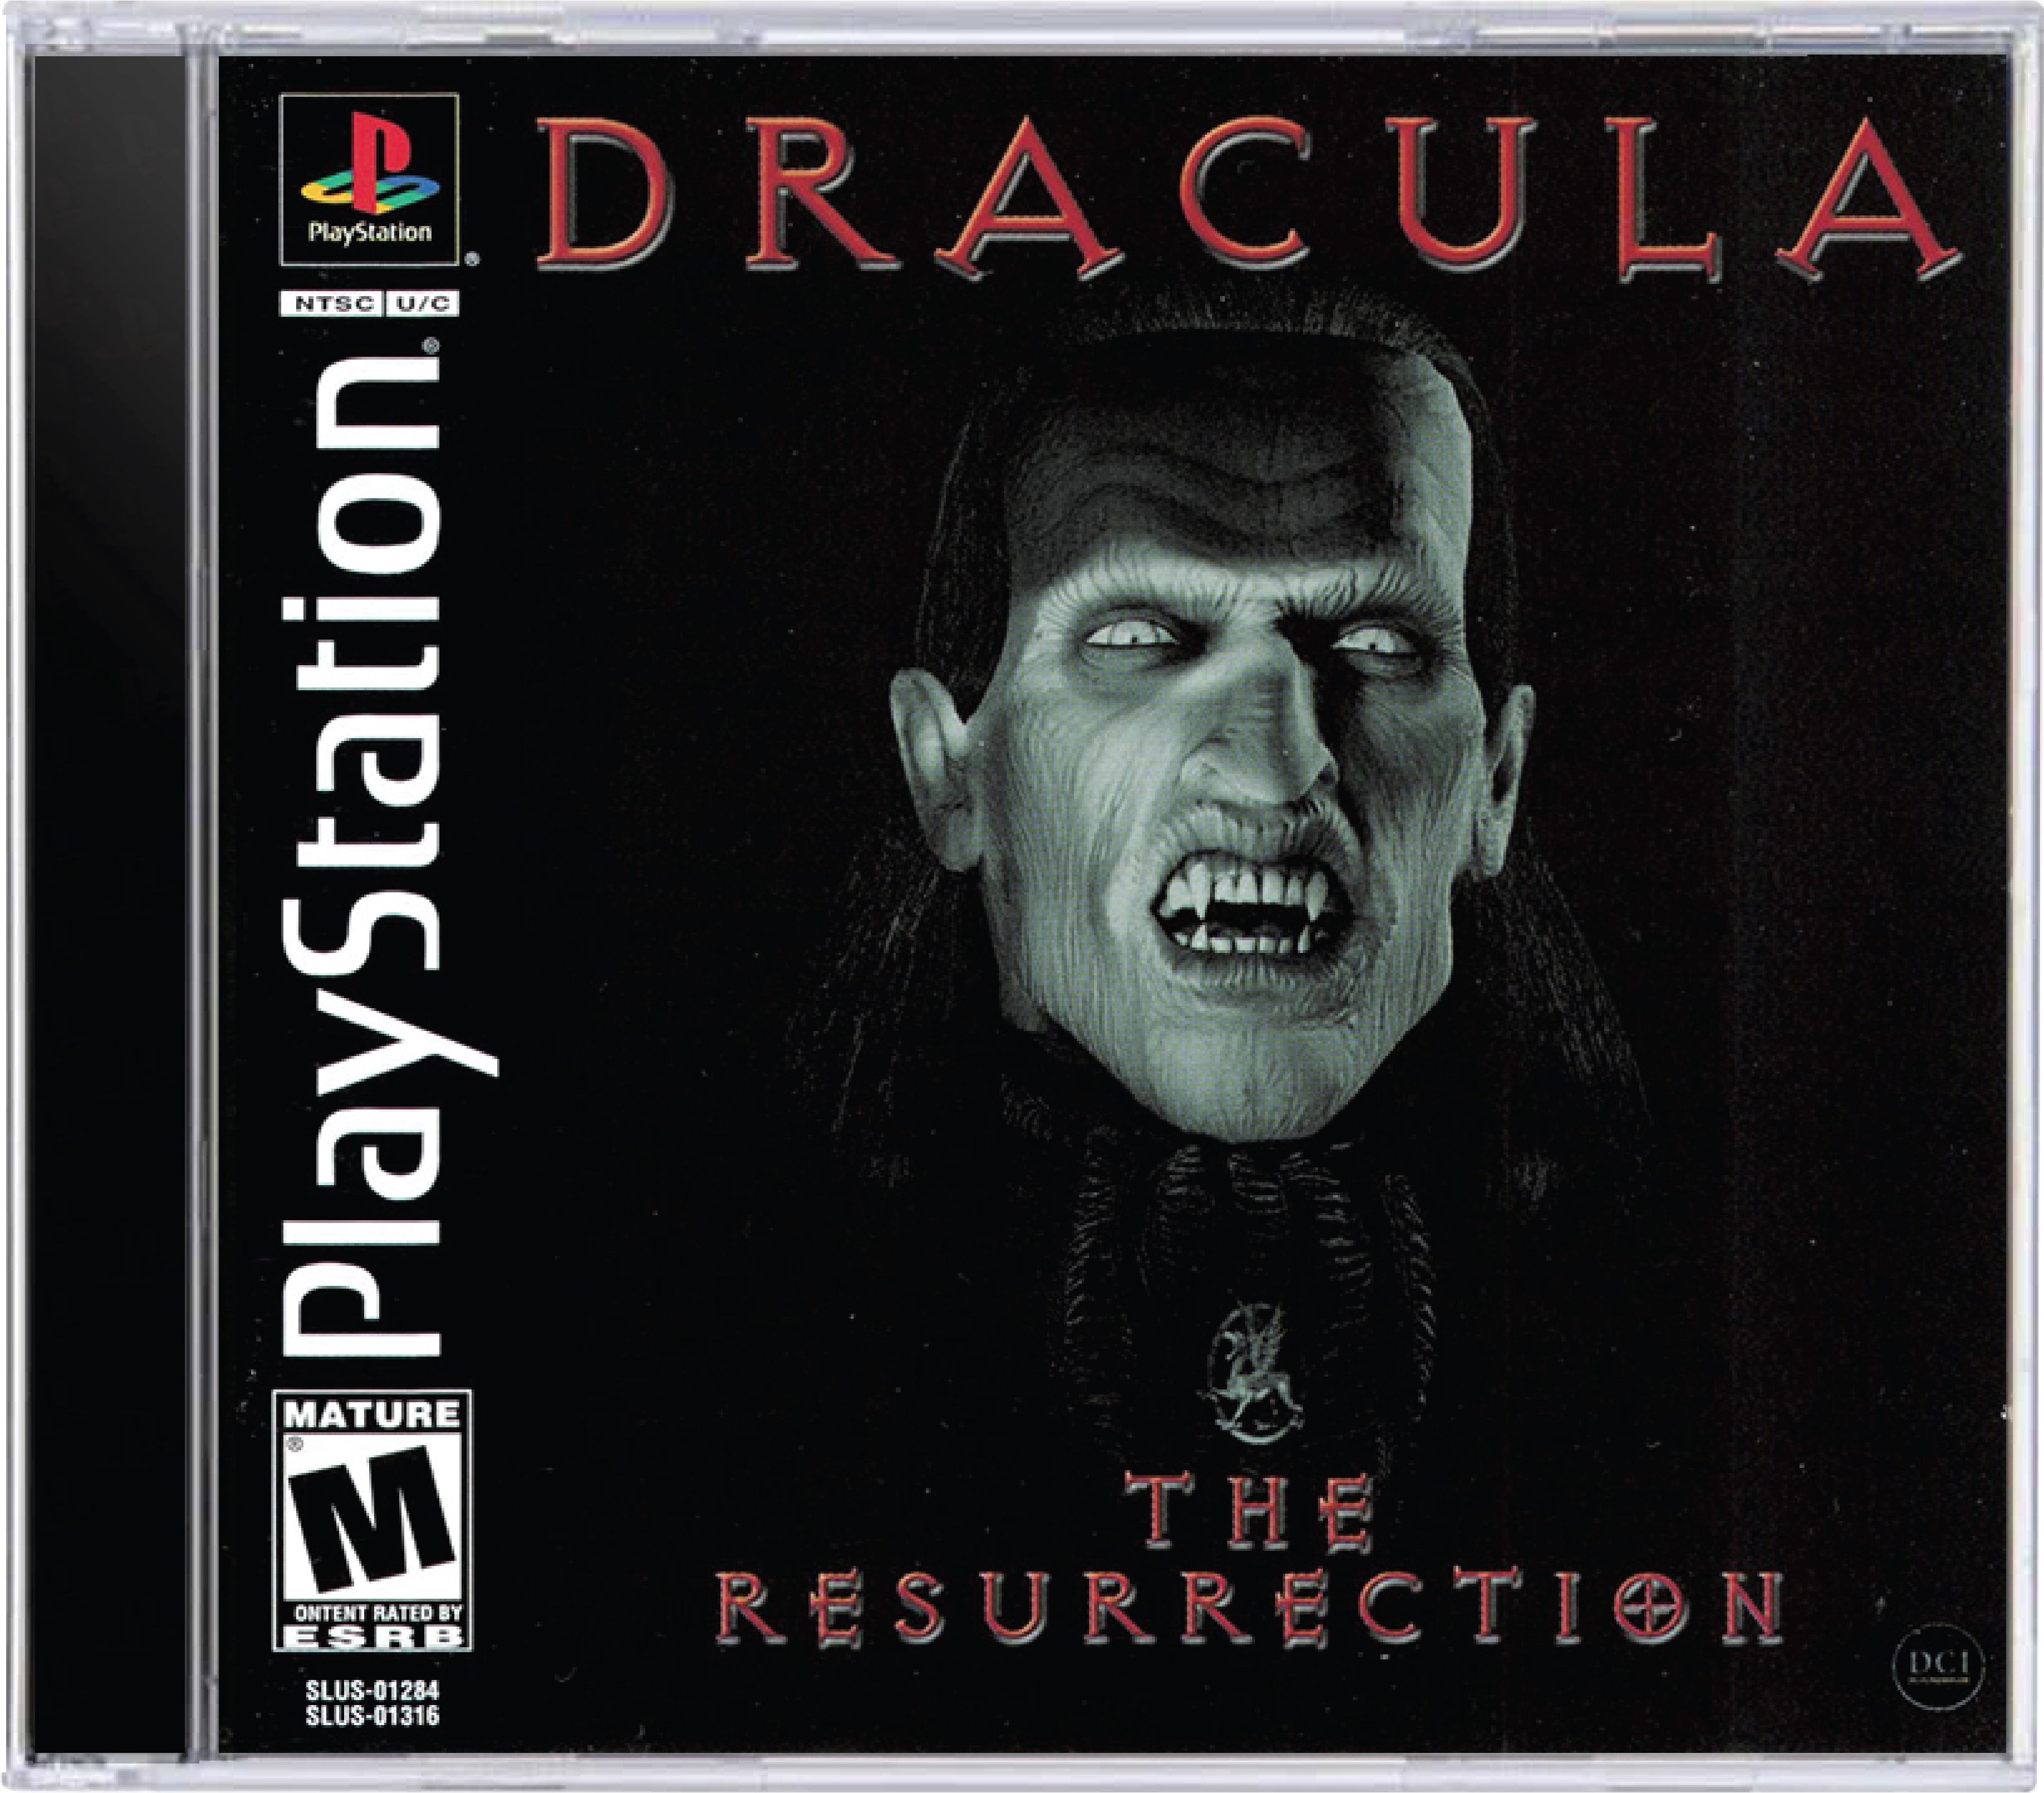 Dracula The Resurrection Cover Art and Product Photo